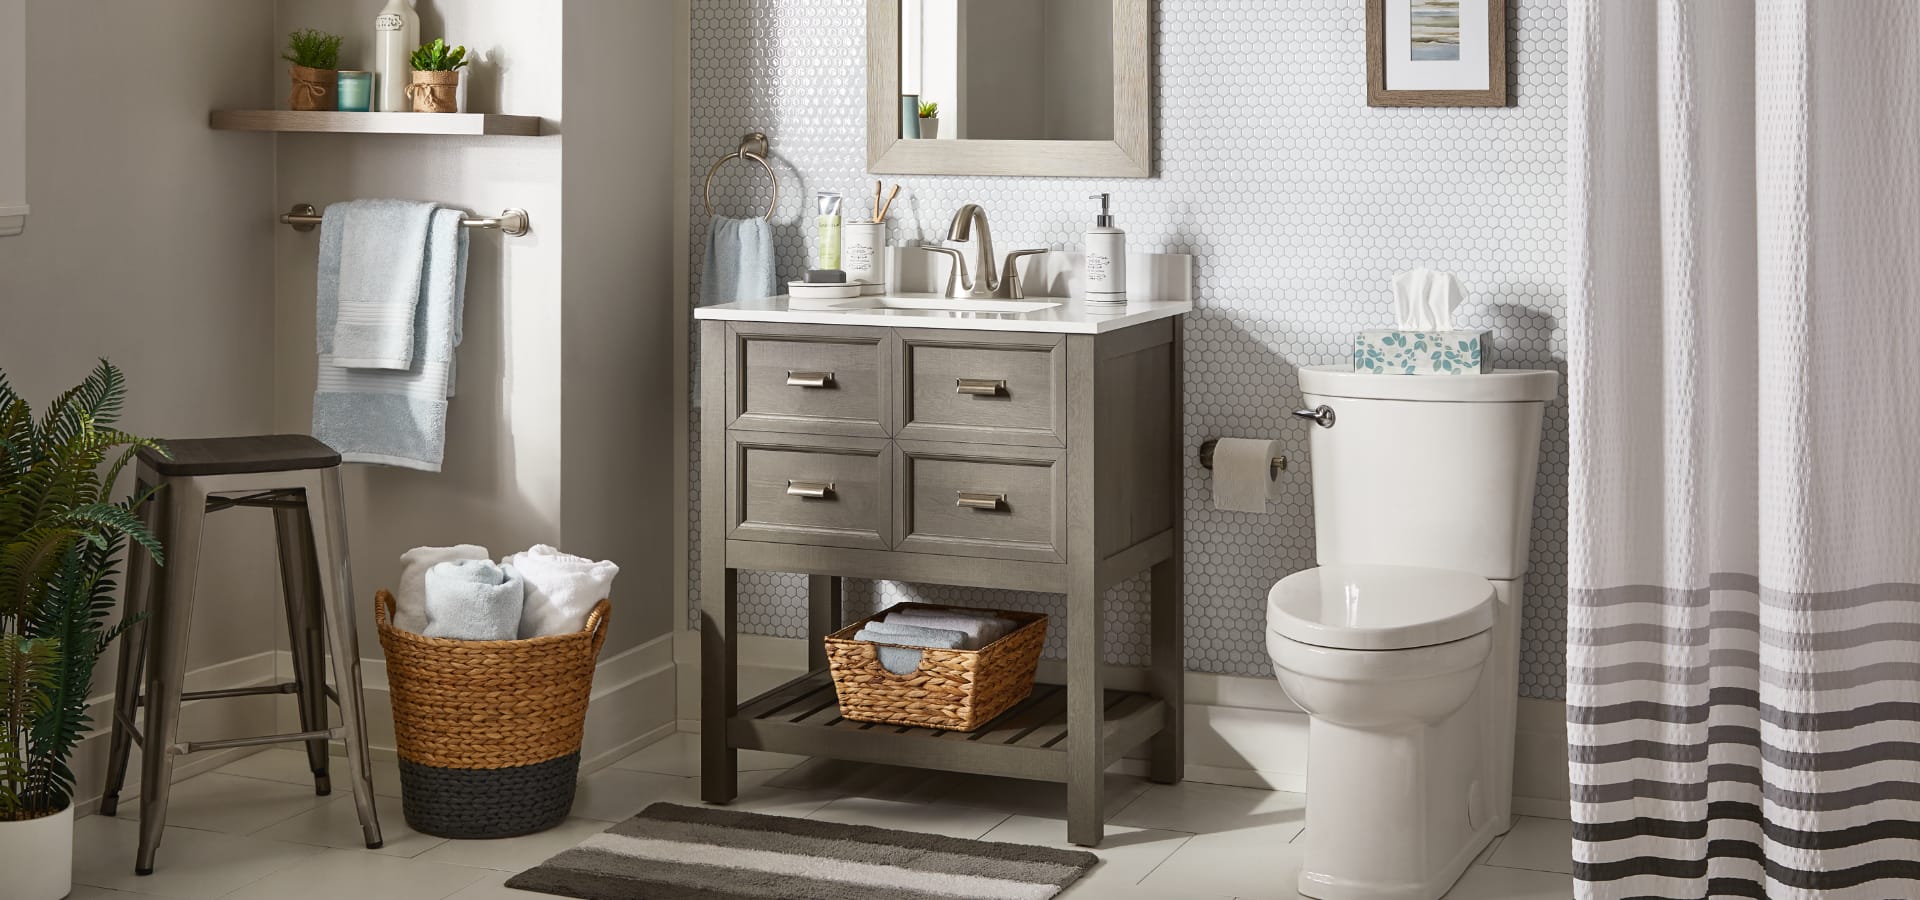 A beautifully done up bathroom with a neutral wooden vanity. 